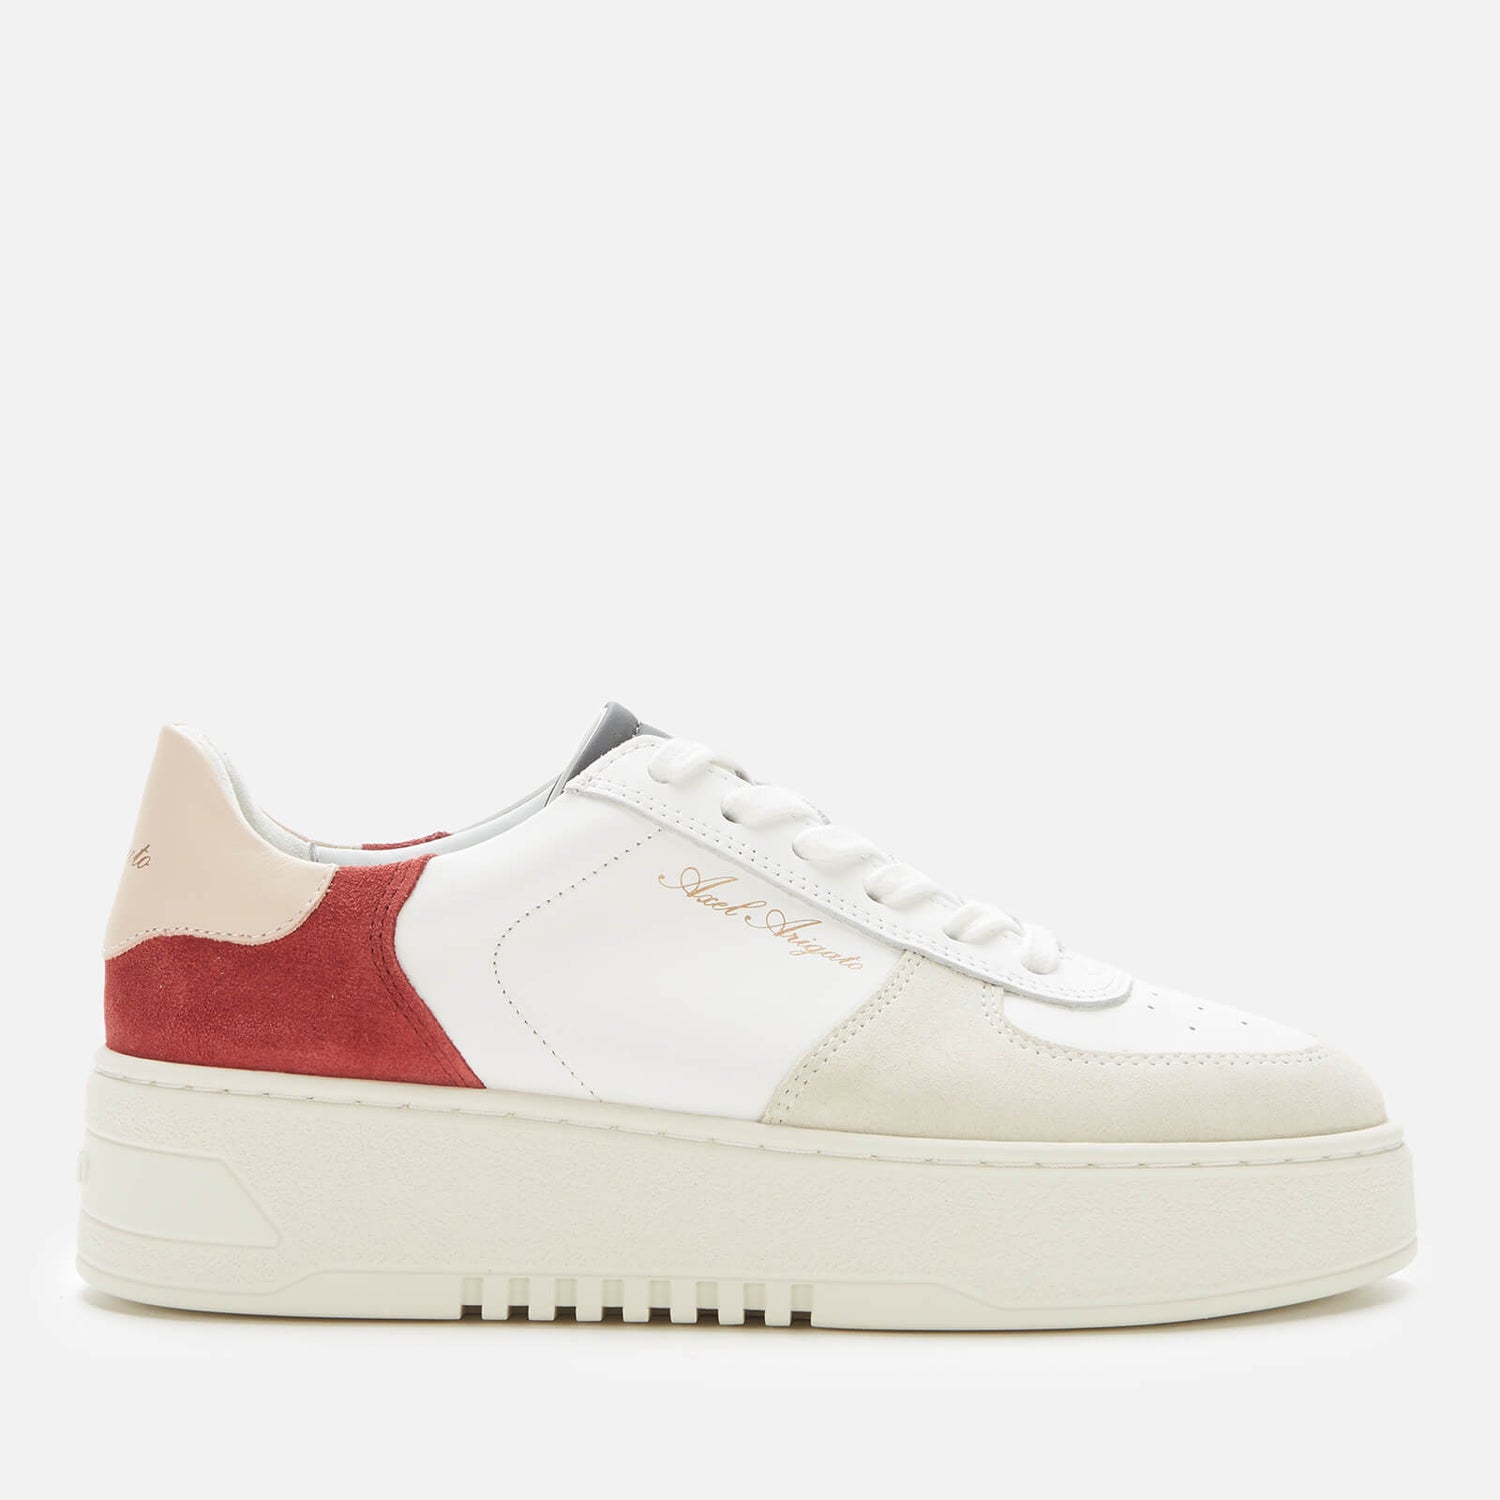 Axel Arigato Women's Orbit Leather/Suede Trainers - White/Red/Dusty Pink